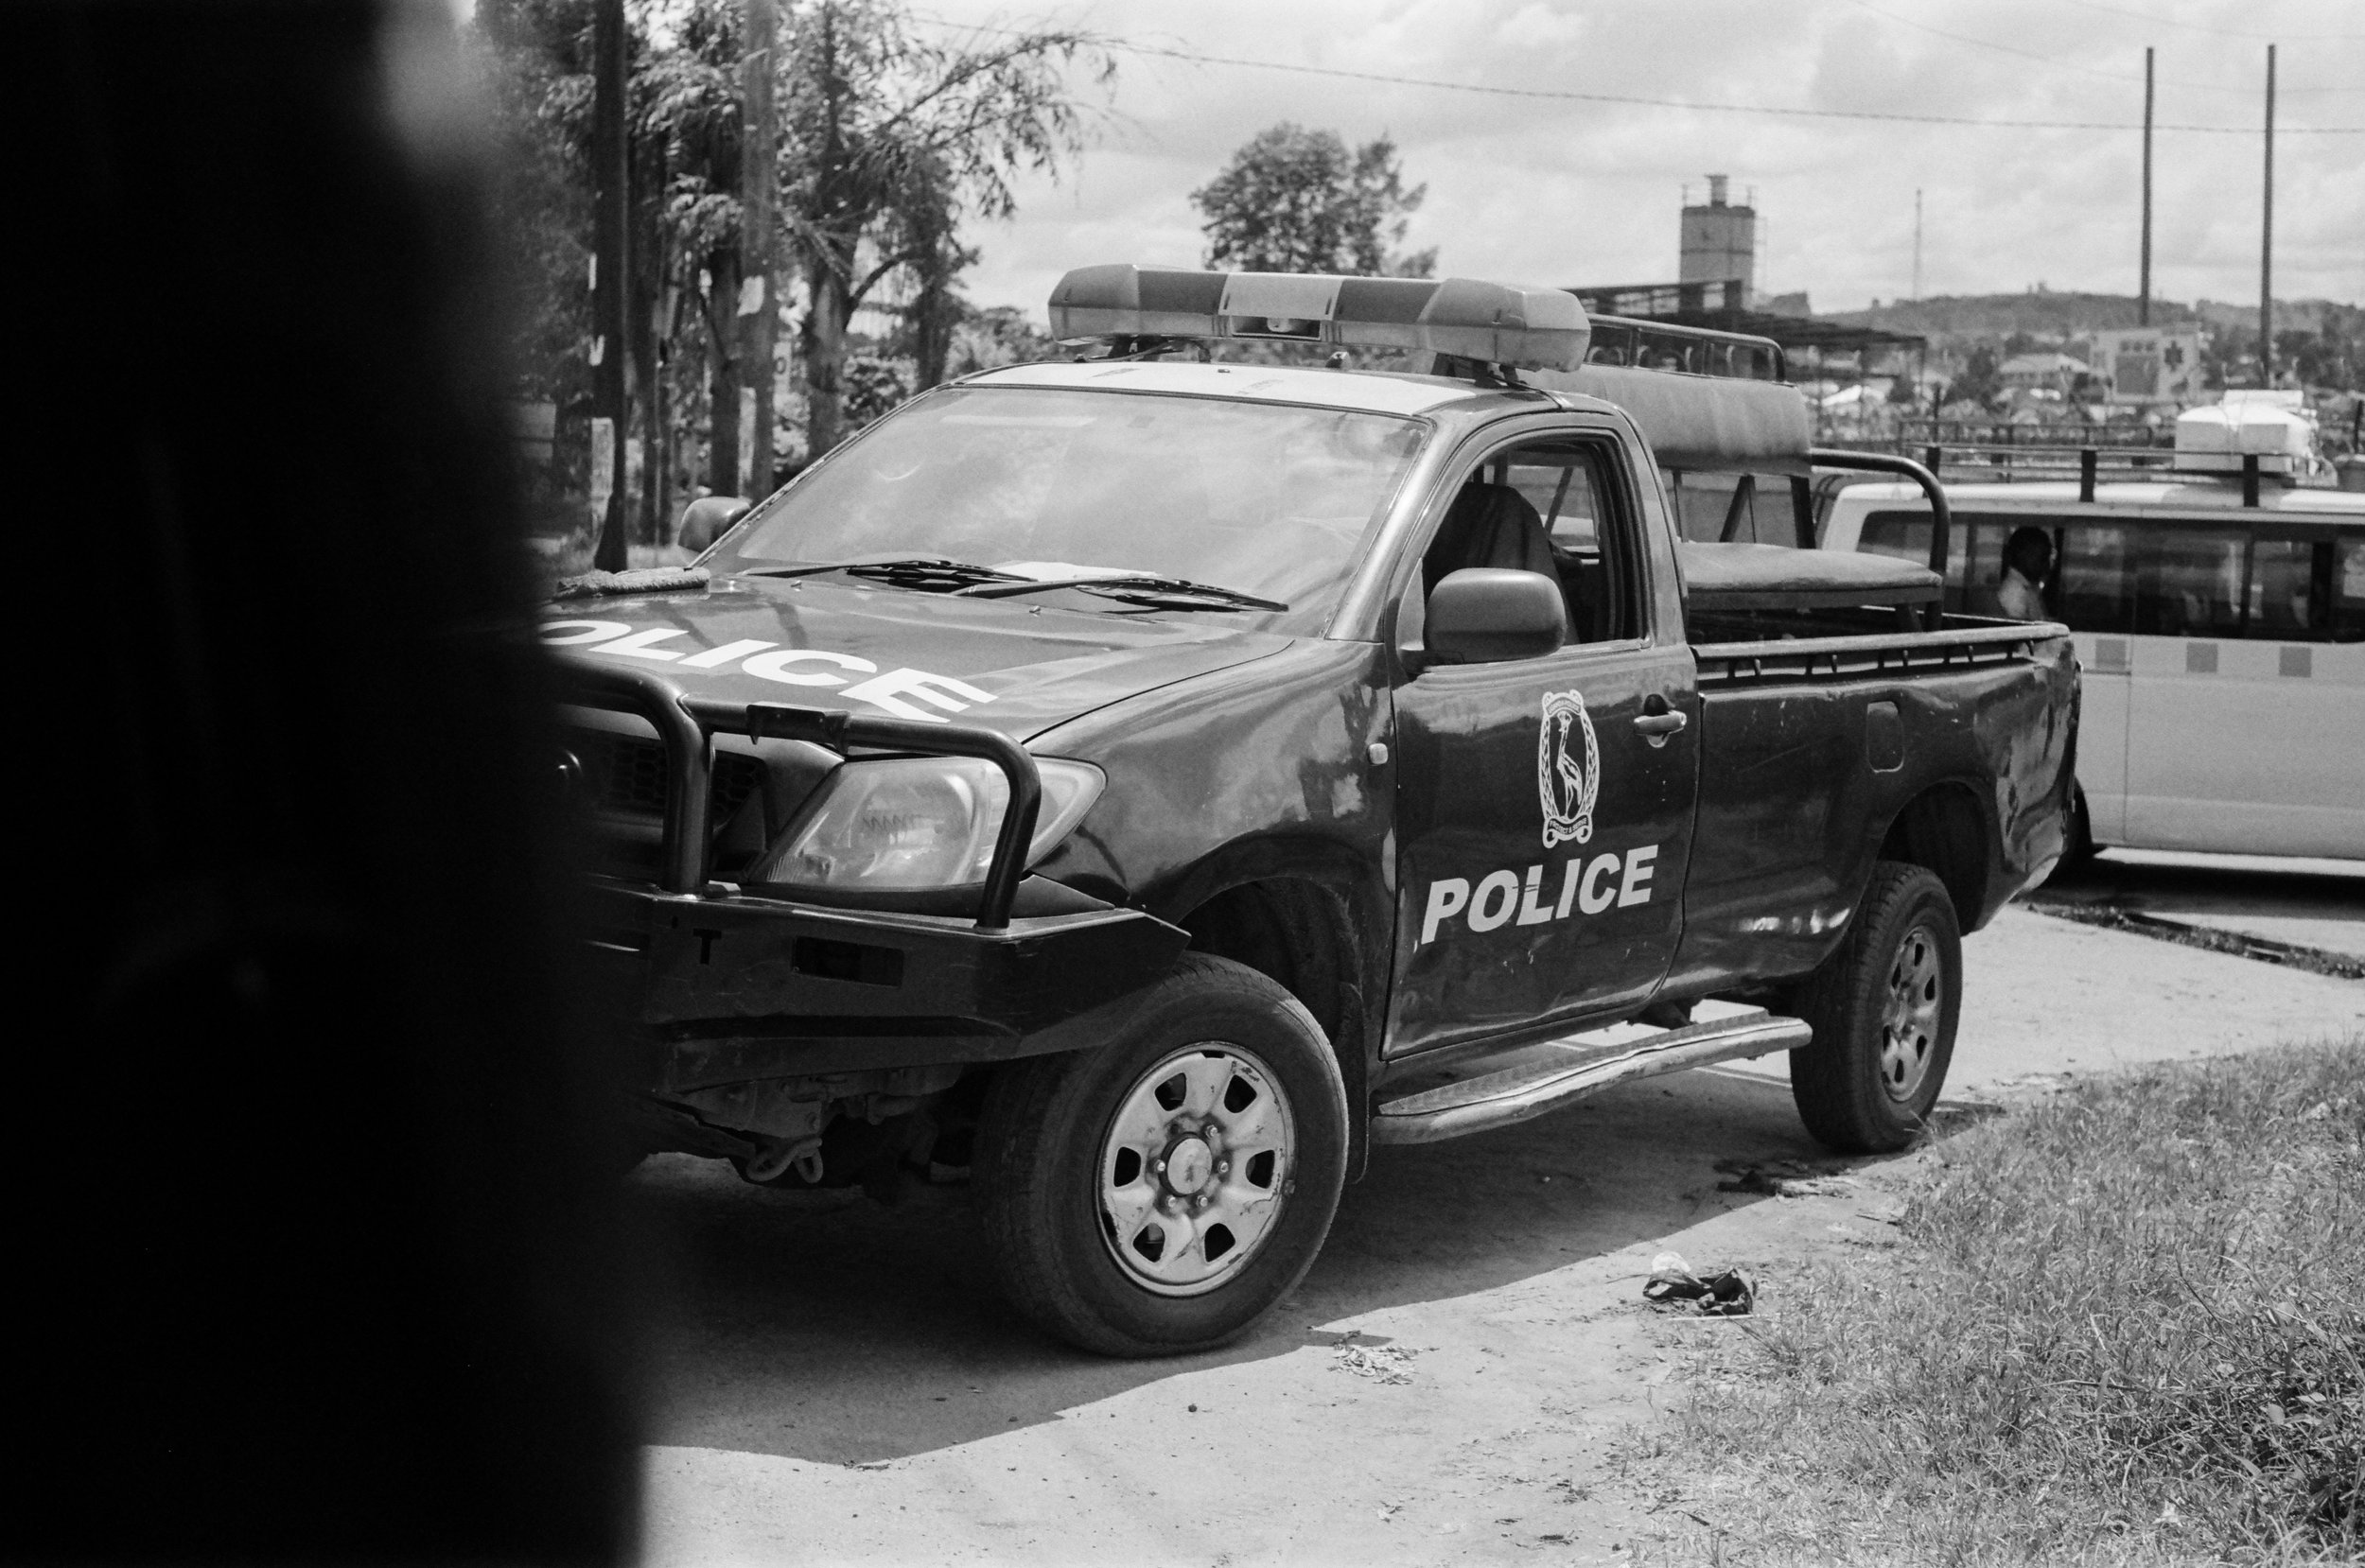 Stopped at a police checkpoint about 3 hours into the drive. Delta 100 35mm. 